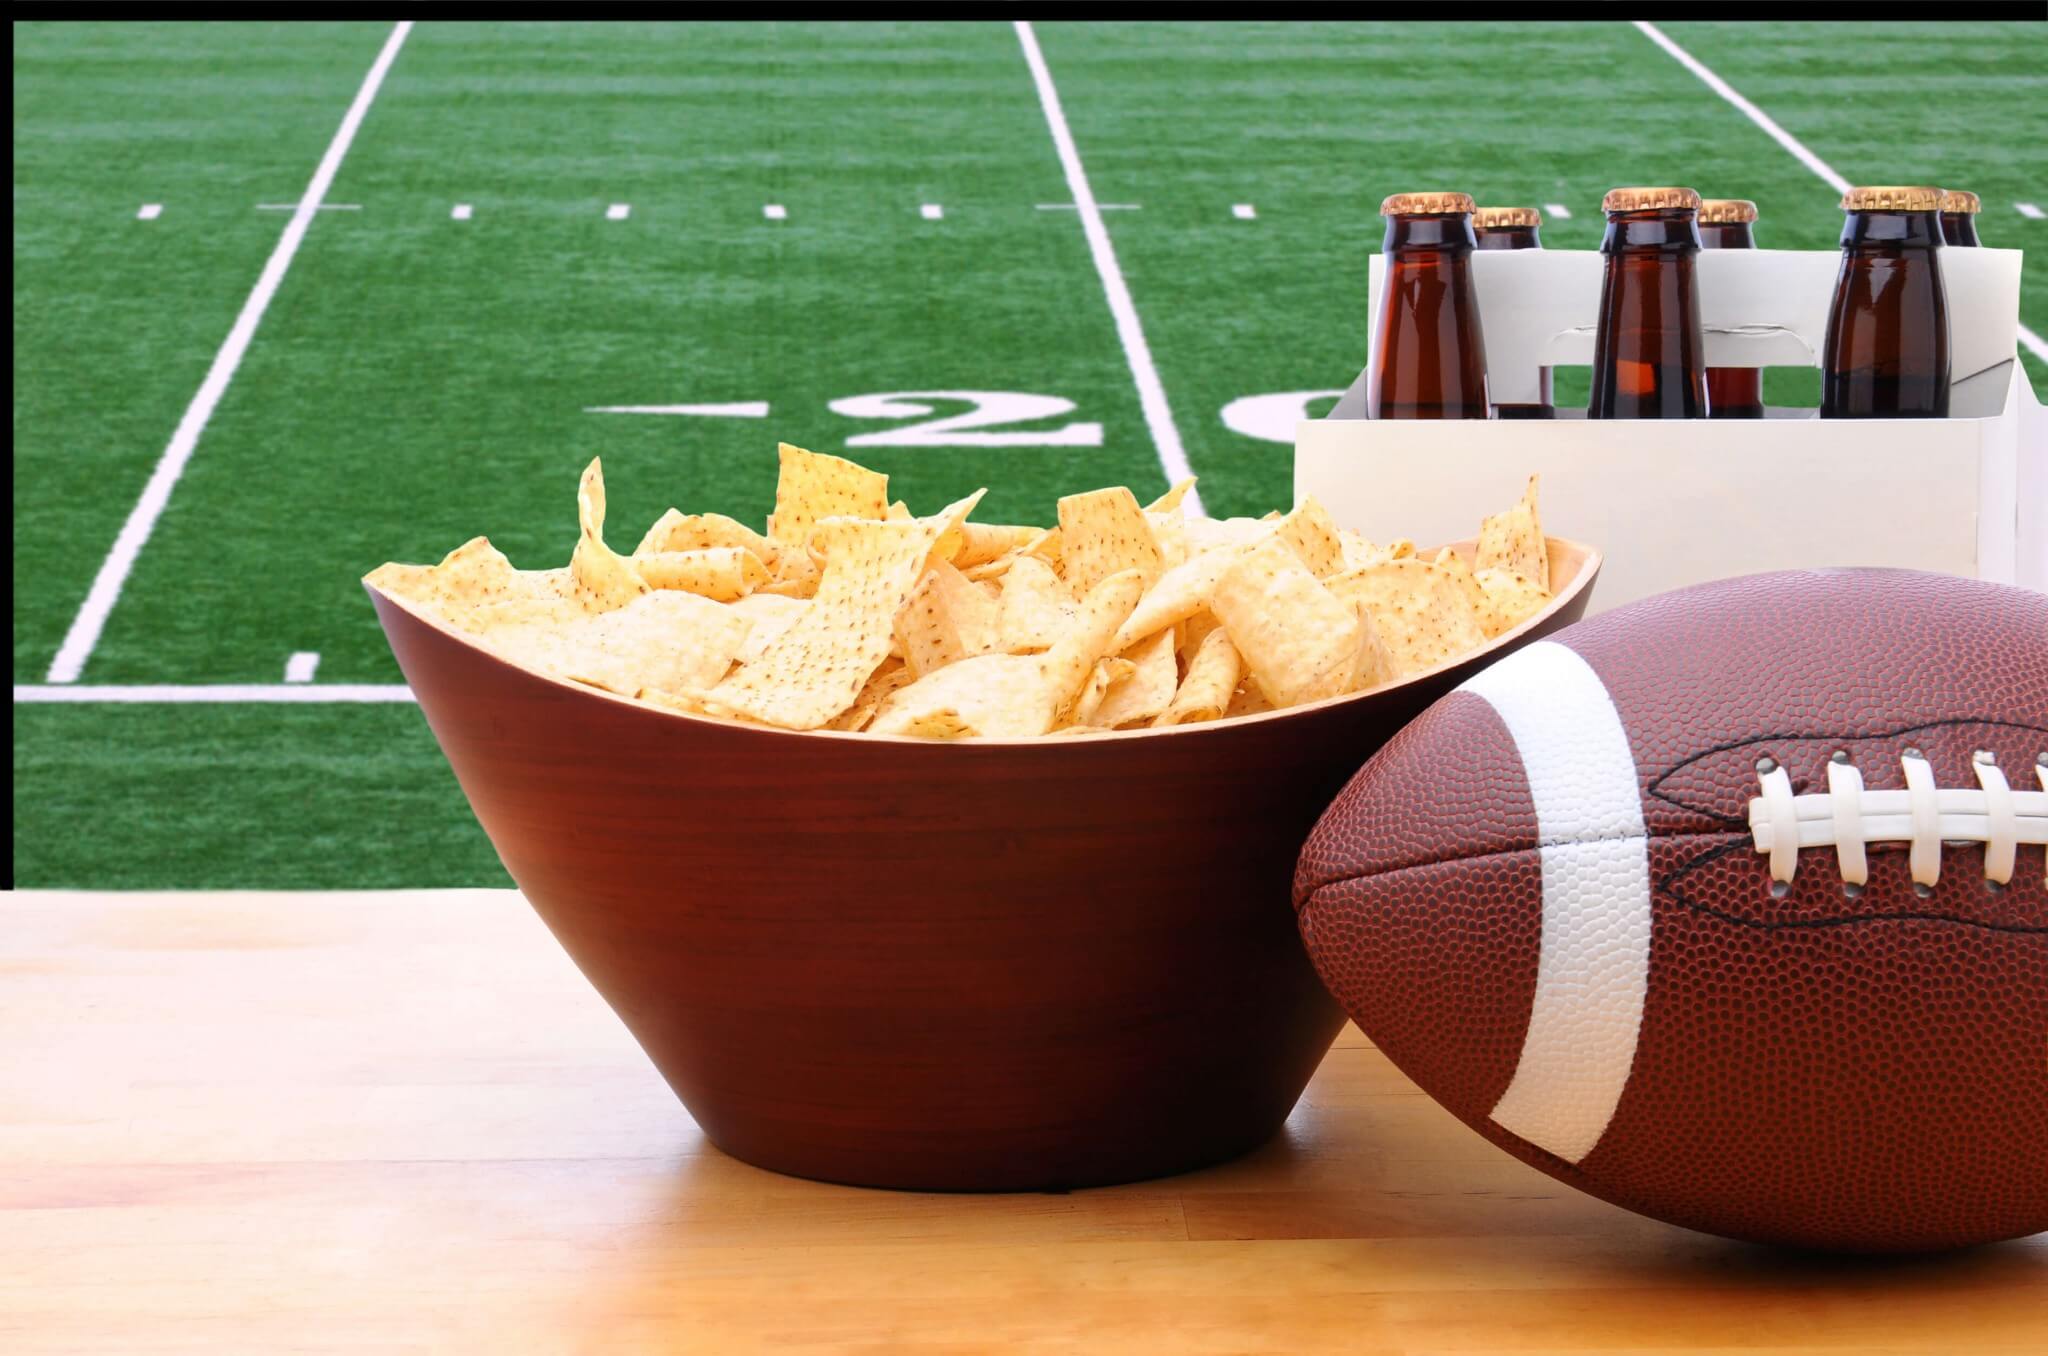 Chips, a six pack of beer, and an American football in front of the Super Bowl on TV.